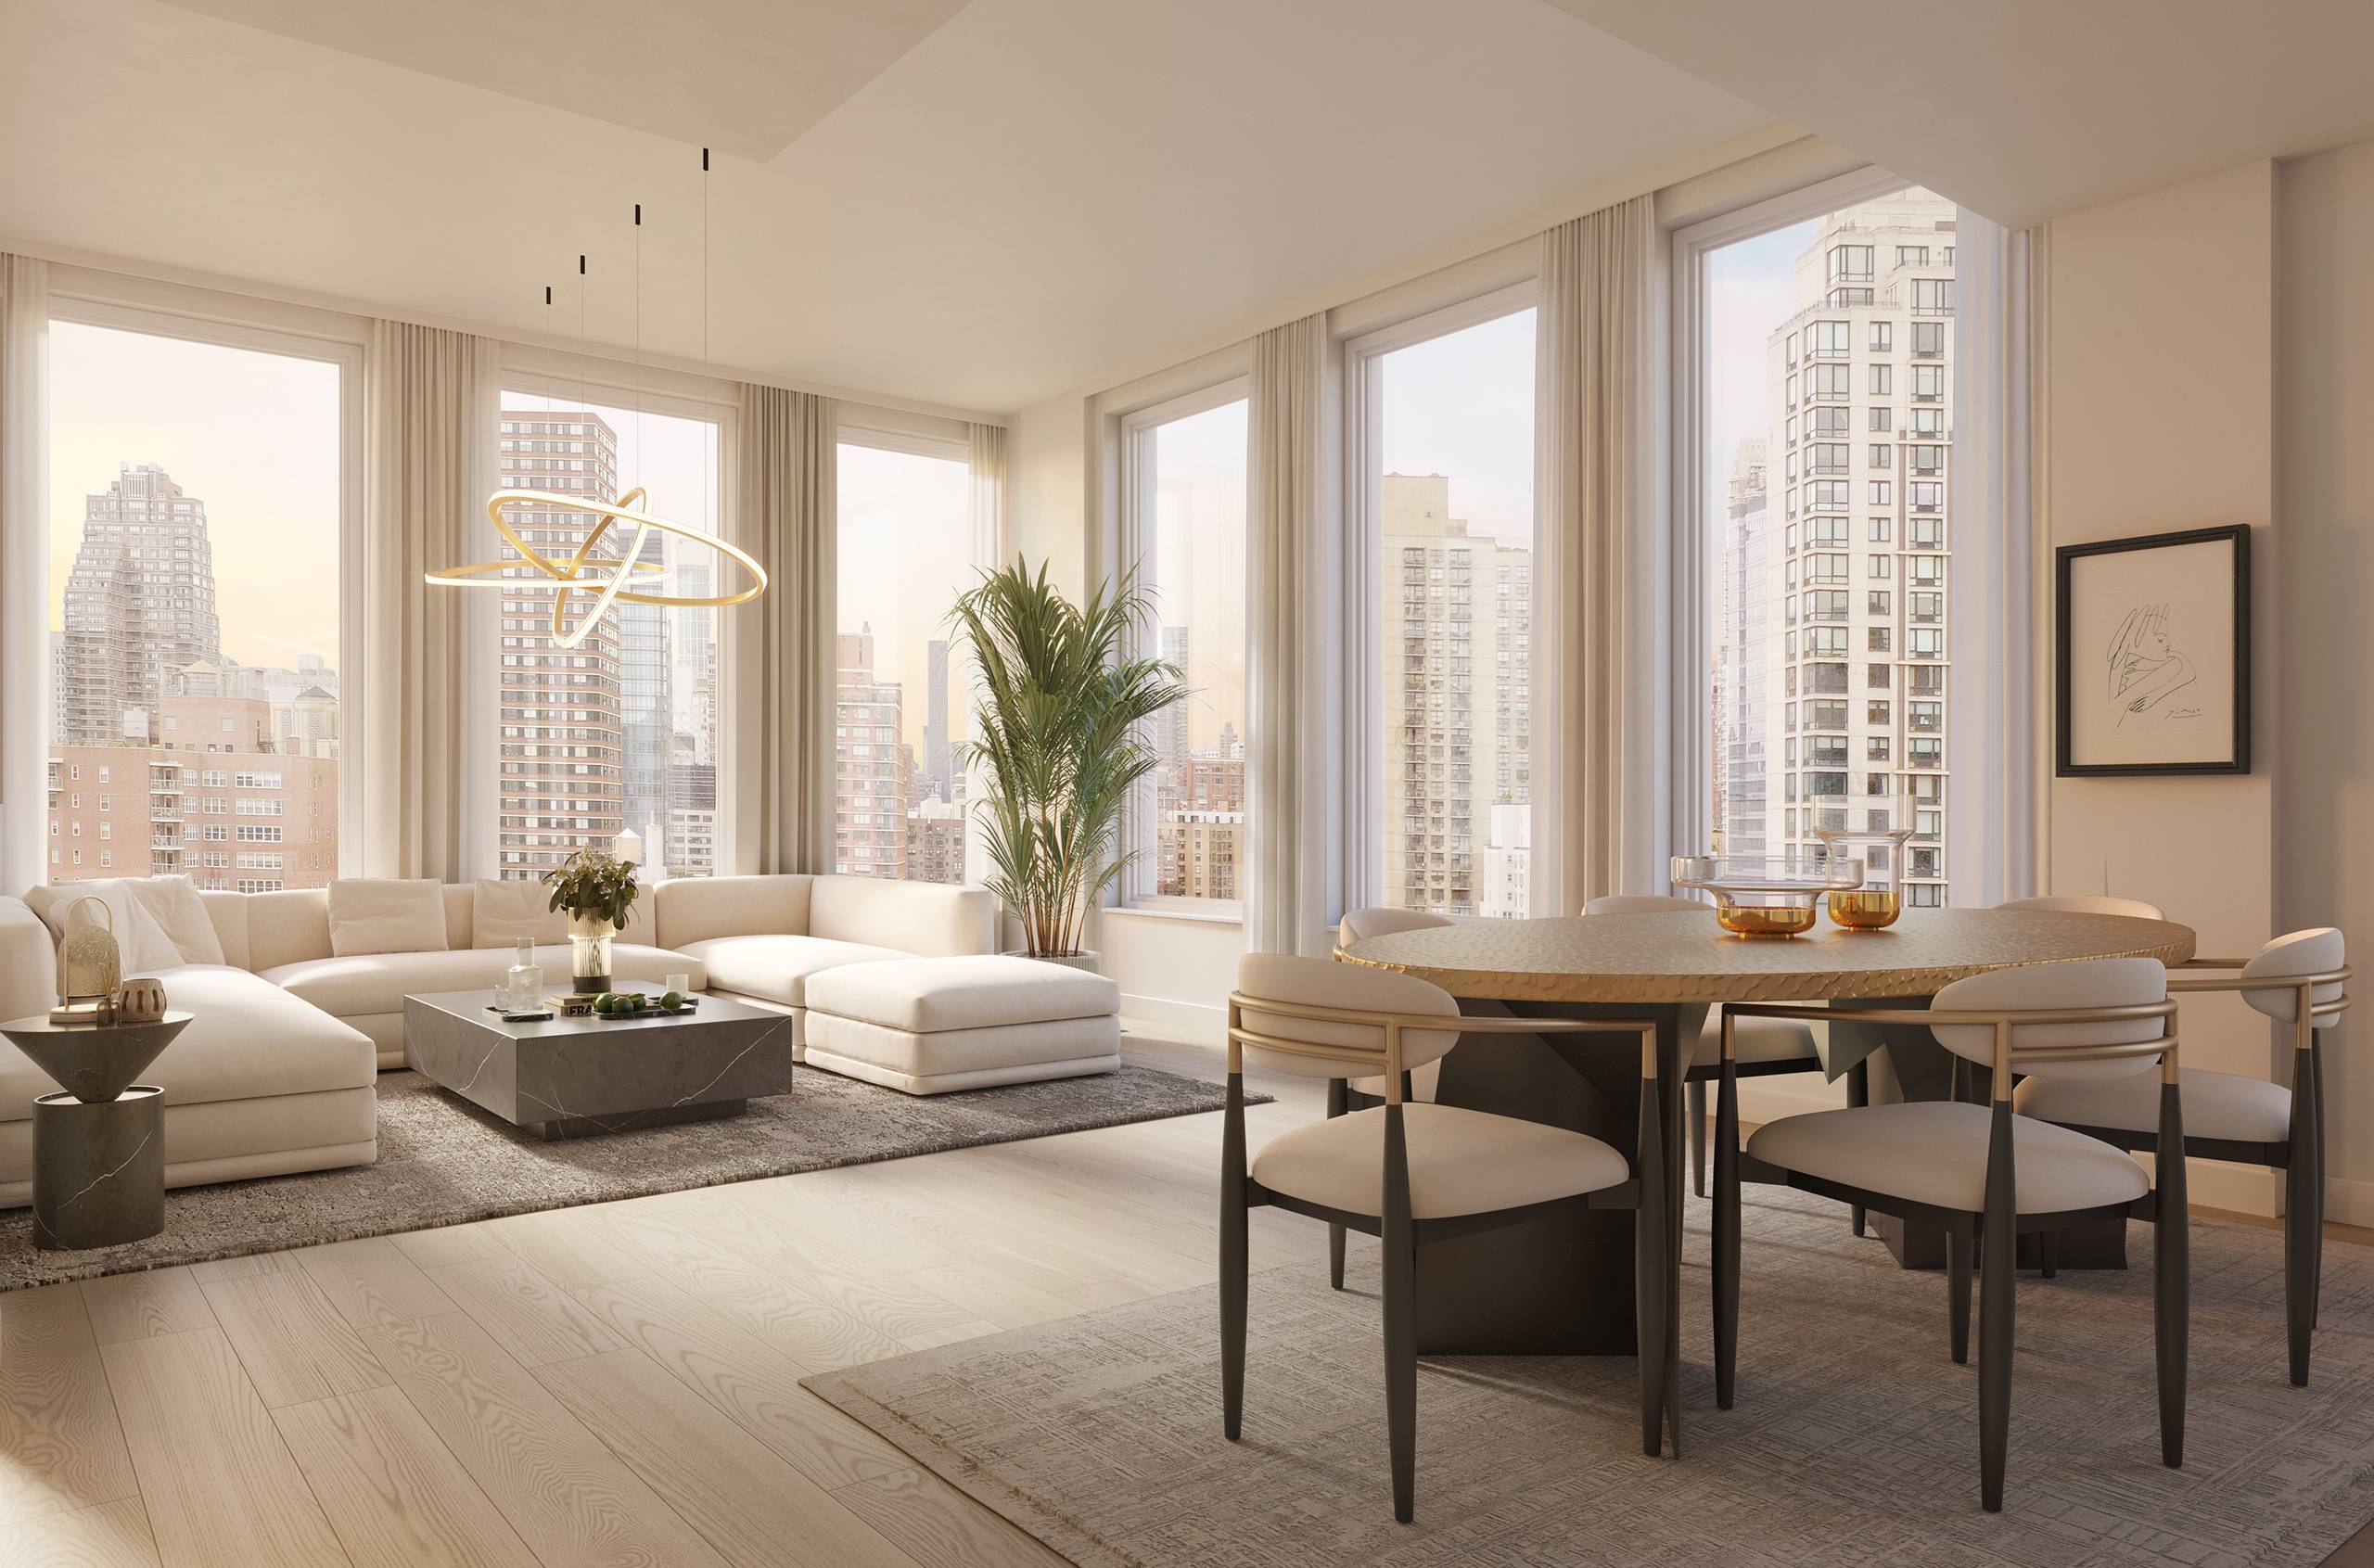 LUXURY NEW DEVELOPMENT IN THE HEART OF THE UPPER EAST SIDE